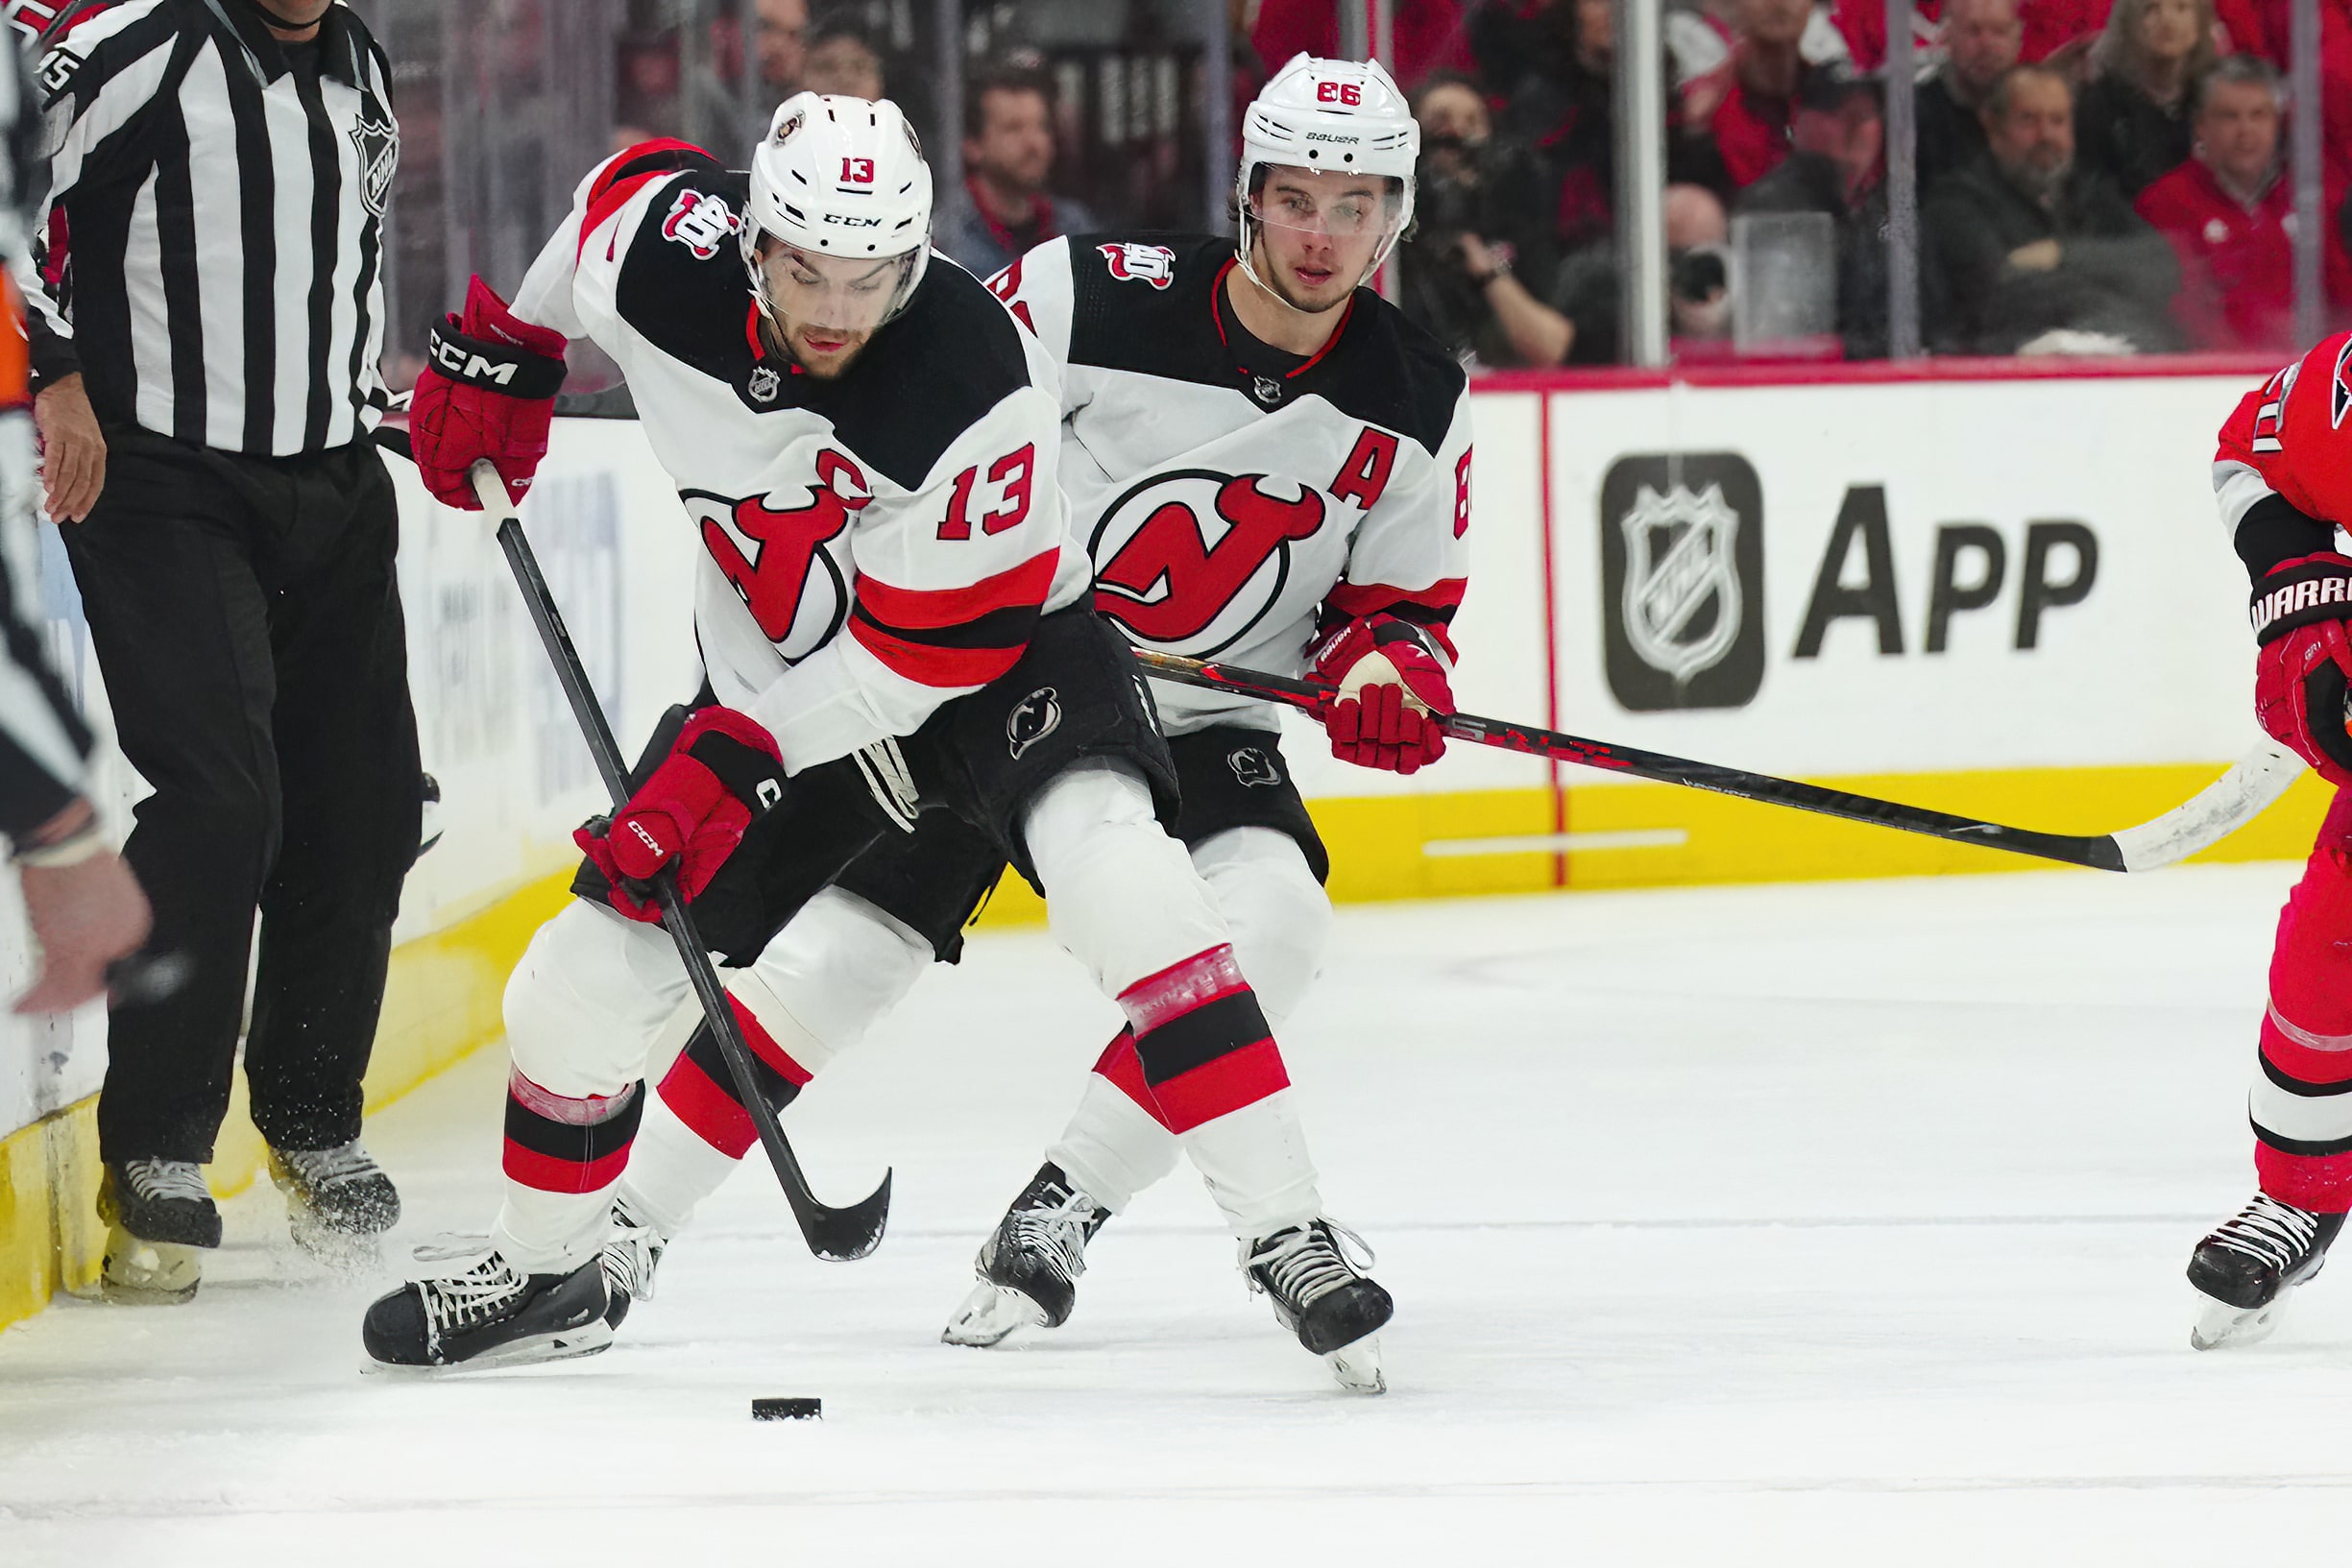 Game Preview #62: New Jersey Devils at Arizona Coyotes - All About